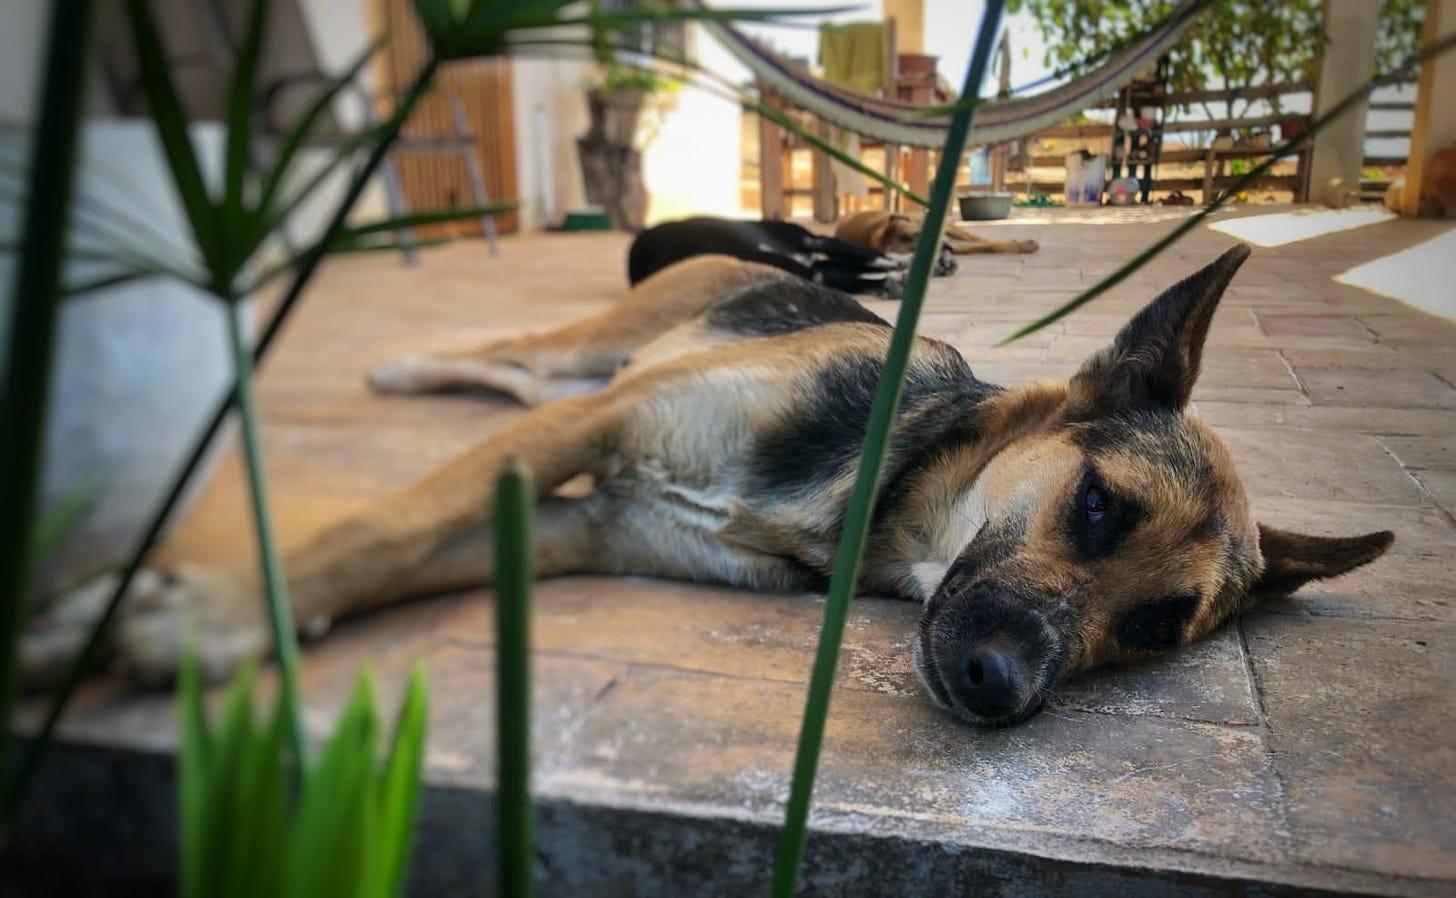 A german shepherd lying on a brick porch with green stalks in the foreground, an enigmatic gaze at the camera